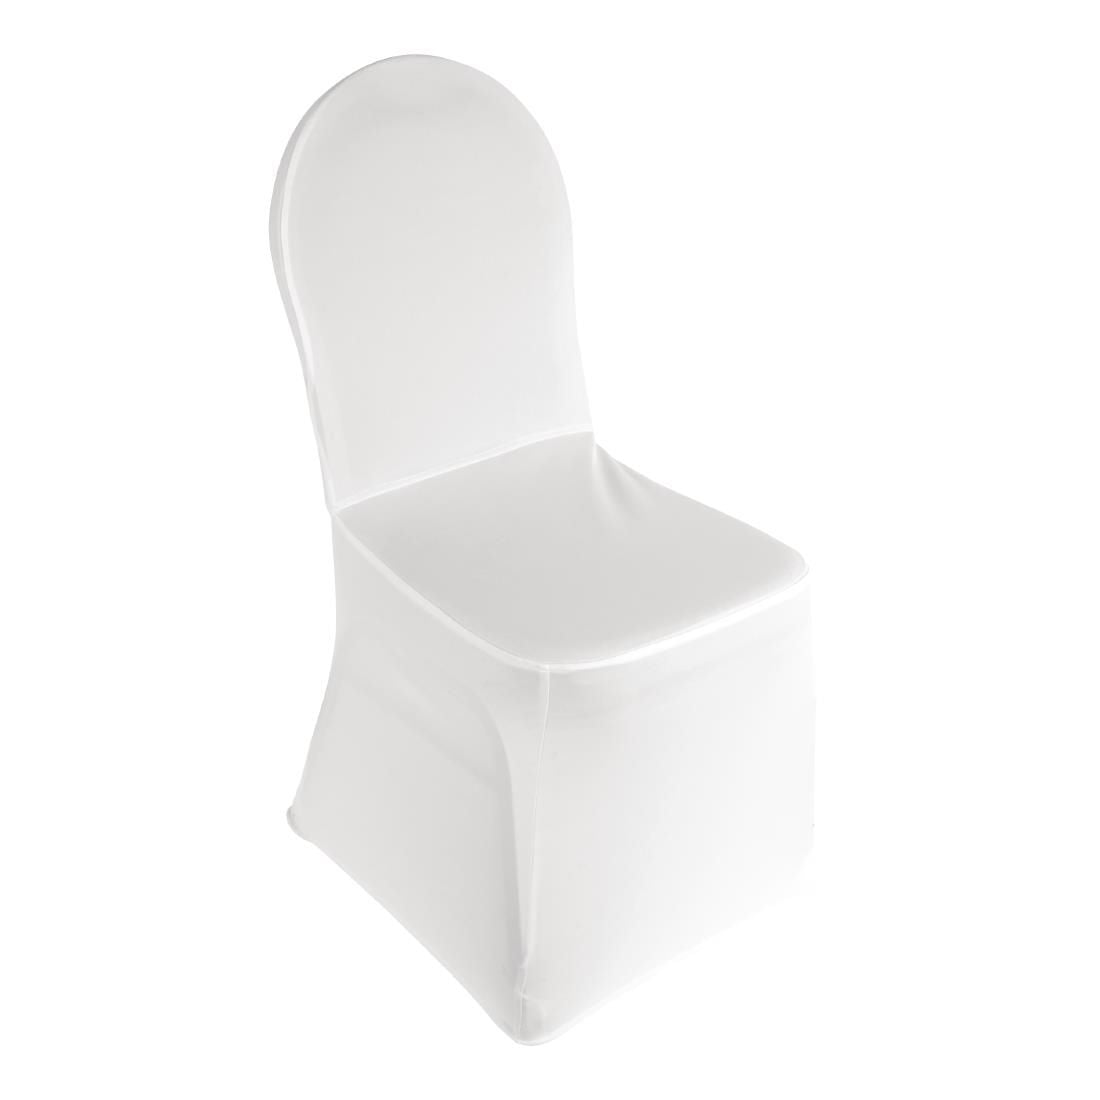 Bolero Banquet Chair Cover JD Catering Equipment Solutions Ltd